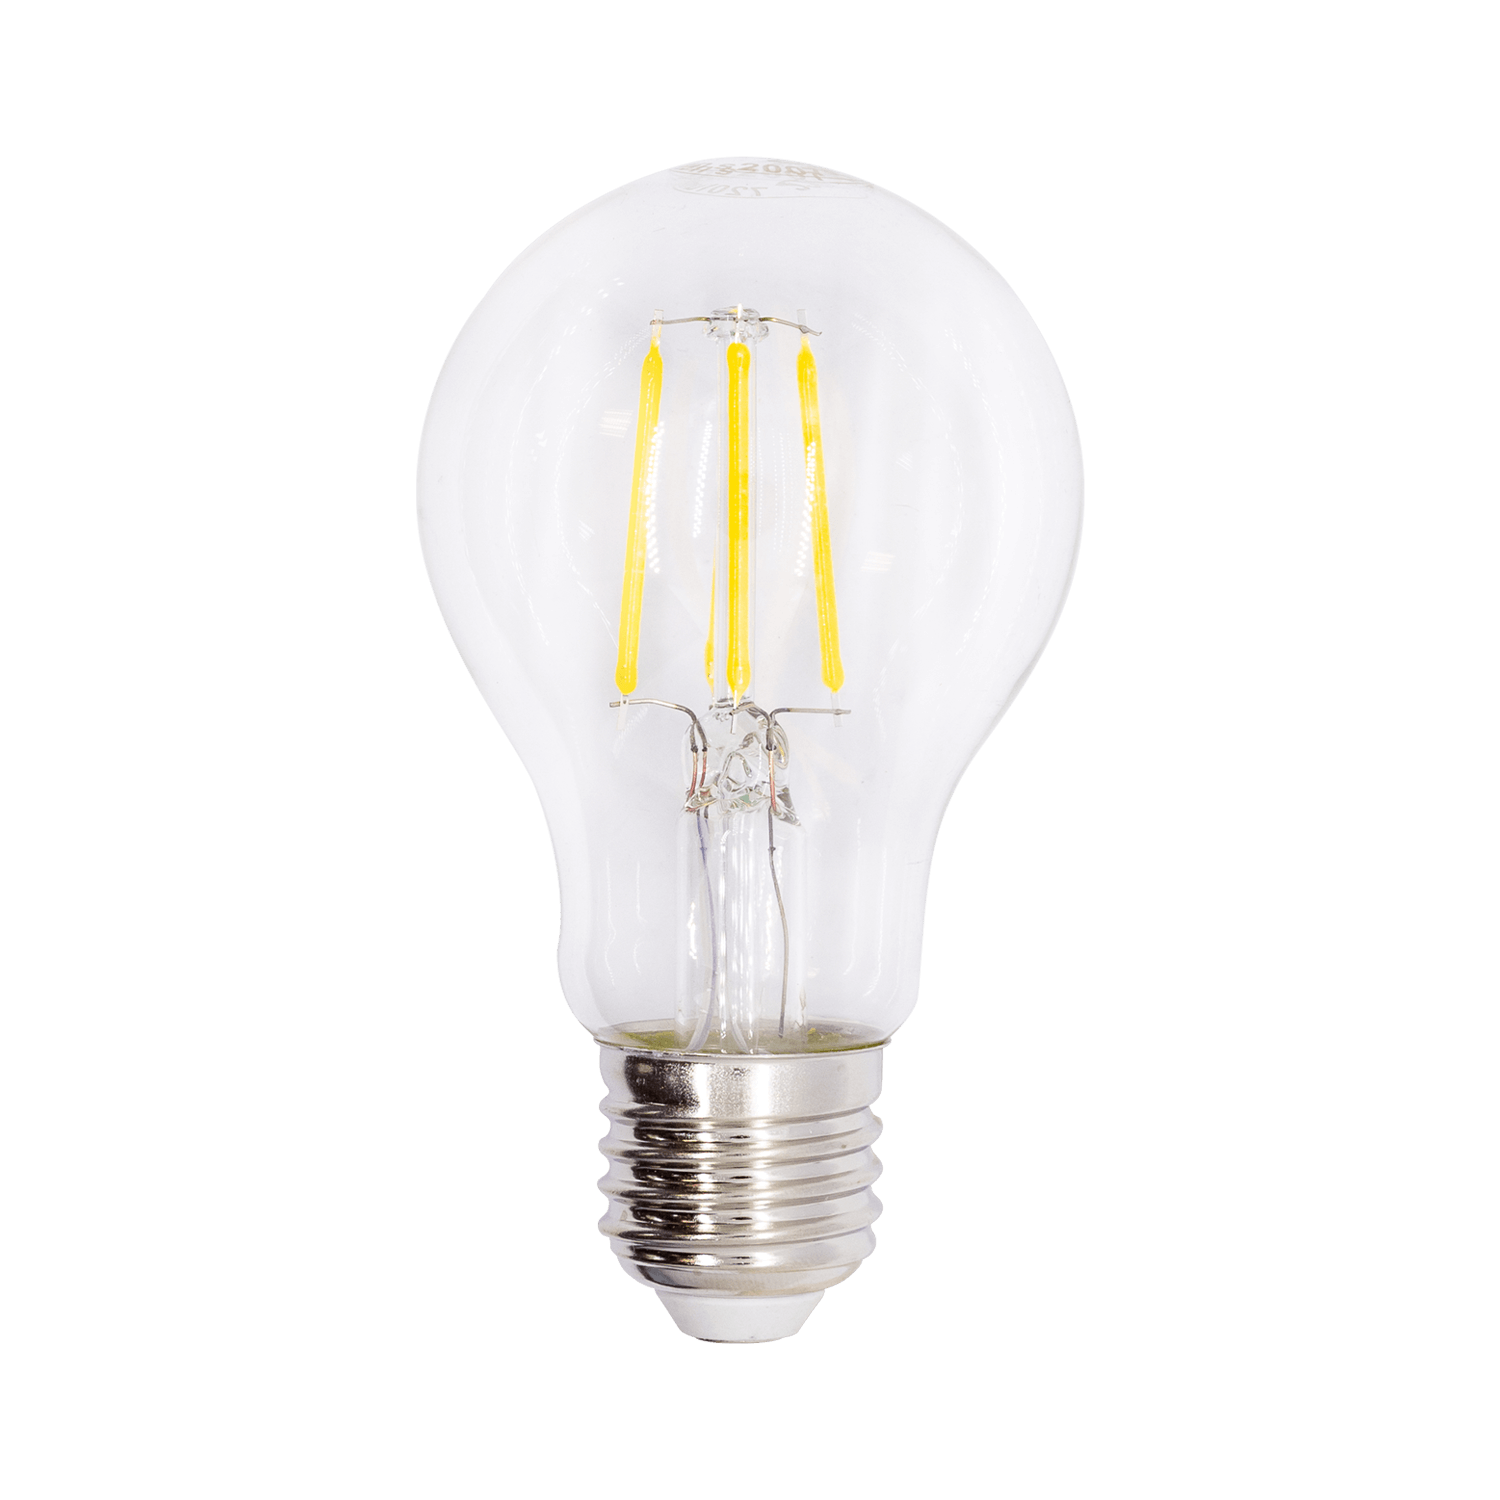 A60 6W ES & E27 Globes Daylight Clear Dimmable LED